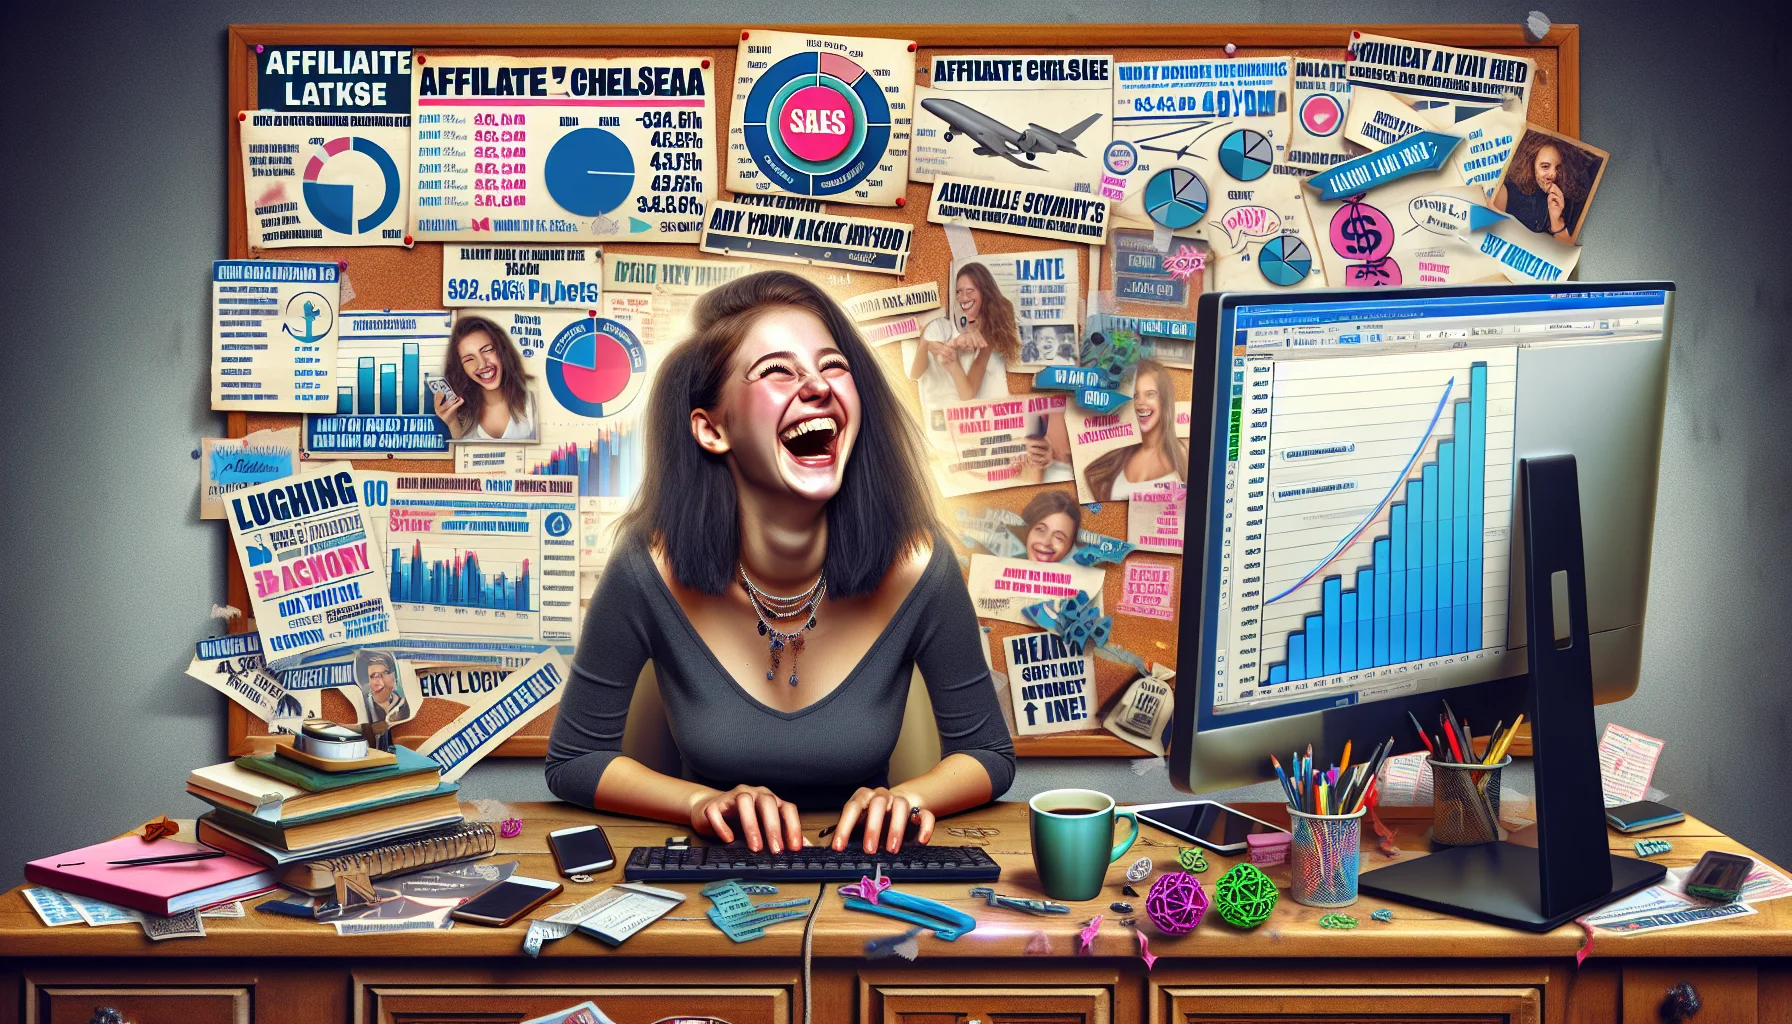 Generate a humorous image portraying a young Caucasian woman, stylized as an online entrepreneur named 'Affiliate Chelsea'. She's sitting at her workspace filled with high-tech gadgets and multiple monitors flaunting various diagrams and analytics related to online marketing. She is laughing wholeheartedly while looking at a monitor that displays increasing sales graphs, signifying successful online money-making. One hand is busy typing while the other holds a cup of coffee. Behind her, a wall adorned with posters outlining her journey, slogans, and inspirational quotes about financial independence.